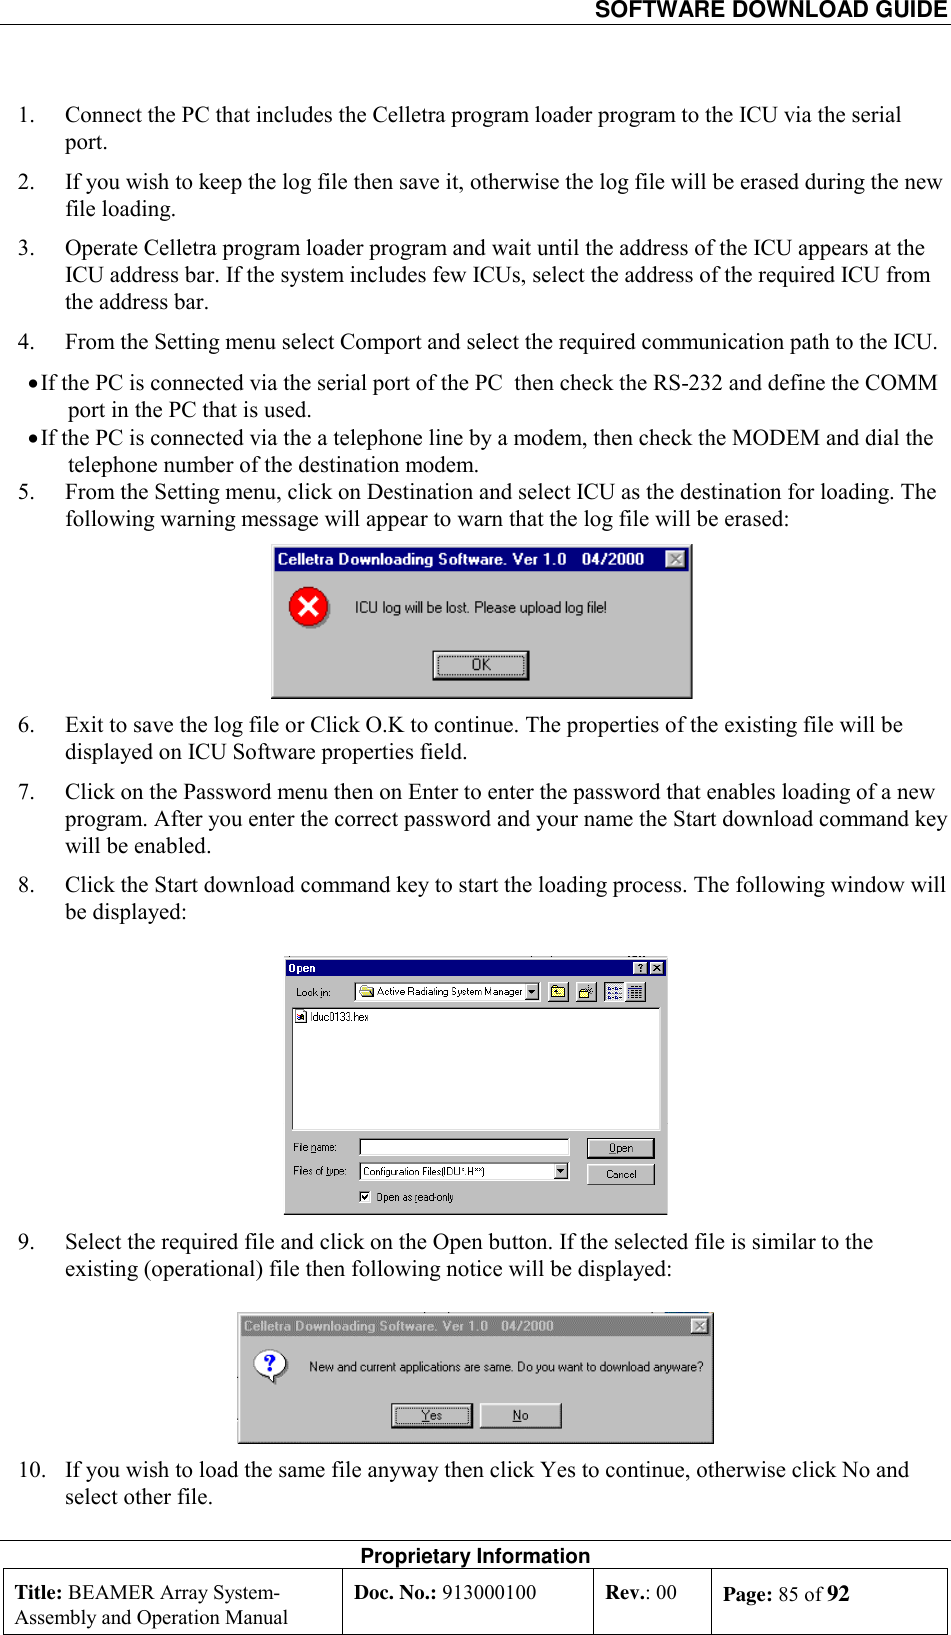   SOFTWARE DOWNLOAD GUIDE Proprietary Information Title: BEAMER Array System- Assembly and Operation Manual Doc. No.: 913000100  Rev.: 00  Page: 85 of 92  1.  Connect the PC that includes the Celletra program loader program to the ICU via the serial port. 2.  If you wish to keep the log file then save it, otherwise the log file will be erased during the new file loading.  3.  Operate Celletra program loader program and wait until the address of the ICU appears at the ICU address bar. If the system includes few ICUs, select the address of the required ICU from the address bar. 4.  From the Setting menu select Comport and select the required communication path to the ICU.  • If the PC is connected via the serial port of the PC  then check the RS-232 and define the COMM port in the PC that is used. • If the PC is connected via the a telephone line by a modem, then check the MODEM and dial the telephone number of the destination modem. 5.  From the Setting menu, click on Destination and select ICU as the destination for loading. The following warning message will appear to warn that the log file will be erased:  6.  Exit to save the log file or Click O.K to continue. The properties of the existing file will be displayed on ICU Software properties field. 7.  Click on the Password menu then on Enter to enter the password that enables loading of a new program. After you enter the correct password and your name the Start download command key will be enabled. 8.  Click the Start download command key to start the loading process. The following window will be displayed:  9.  Select the required file and click on the Open button. If the selected file is similar to the existing (operational) file then following notice will be displayed:  10.  If you wish to load the same file anyway then click Yes to continue, otherwise click No and select other file.  